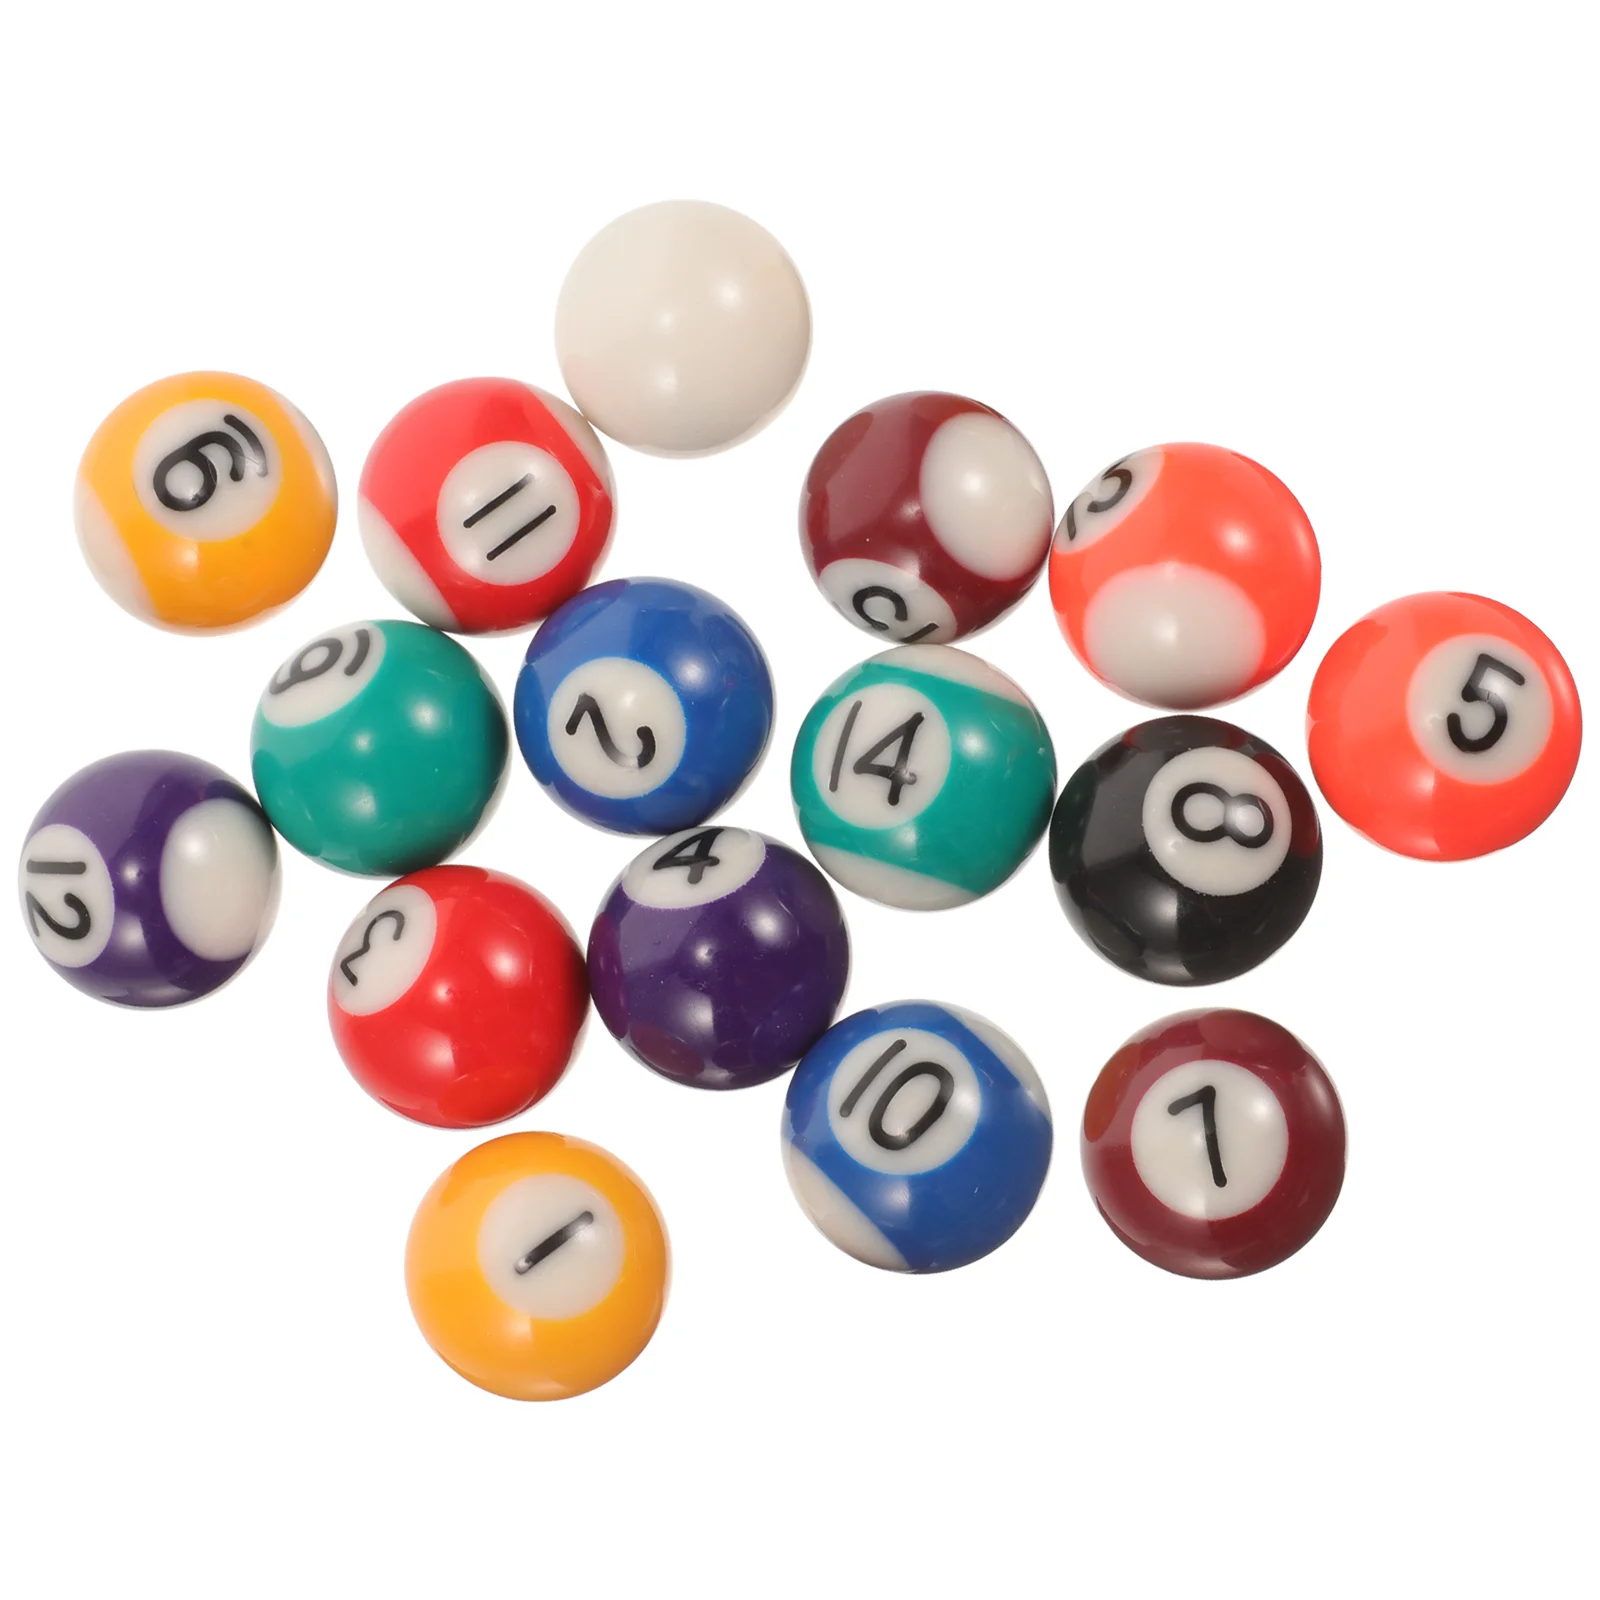 billiard replacement billiard ball replaceable white balls large wear resistant accessory 1 Set of Miniature Billiard Ball Toys Replaceable Billiard Ball Toys Resin Pool Balls Billiard Necessity